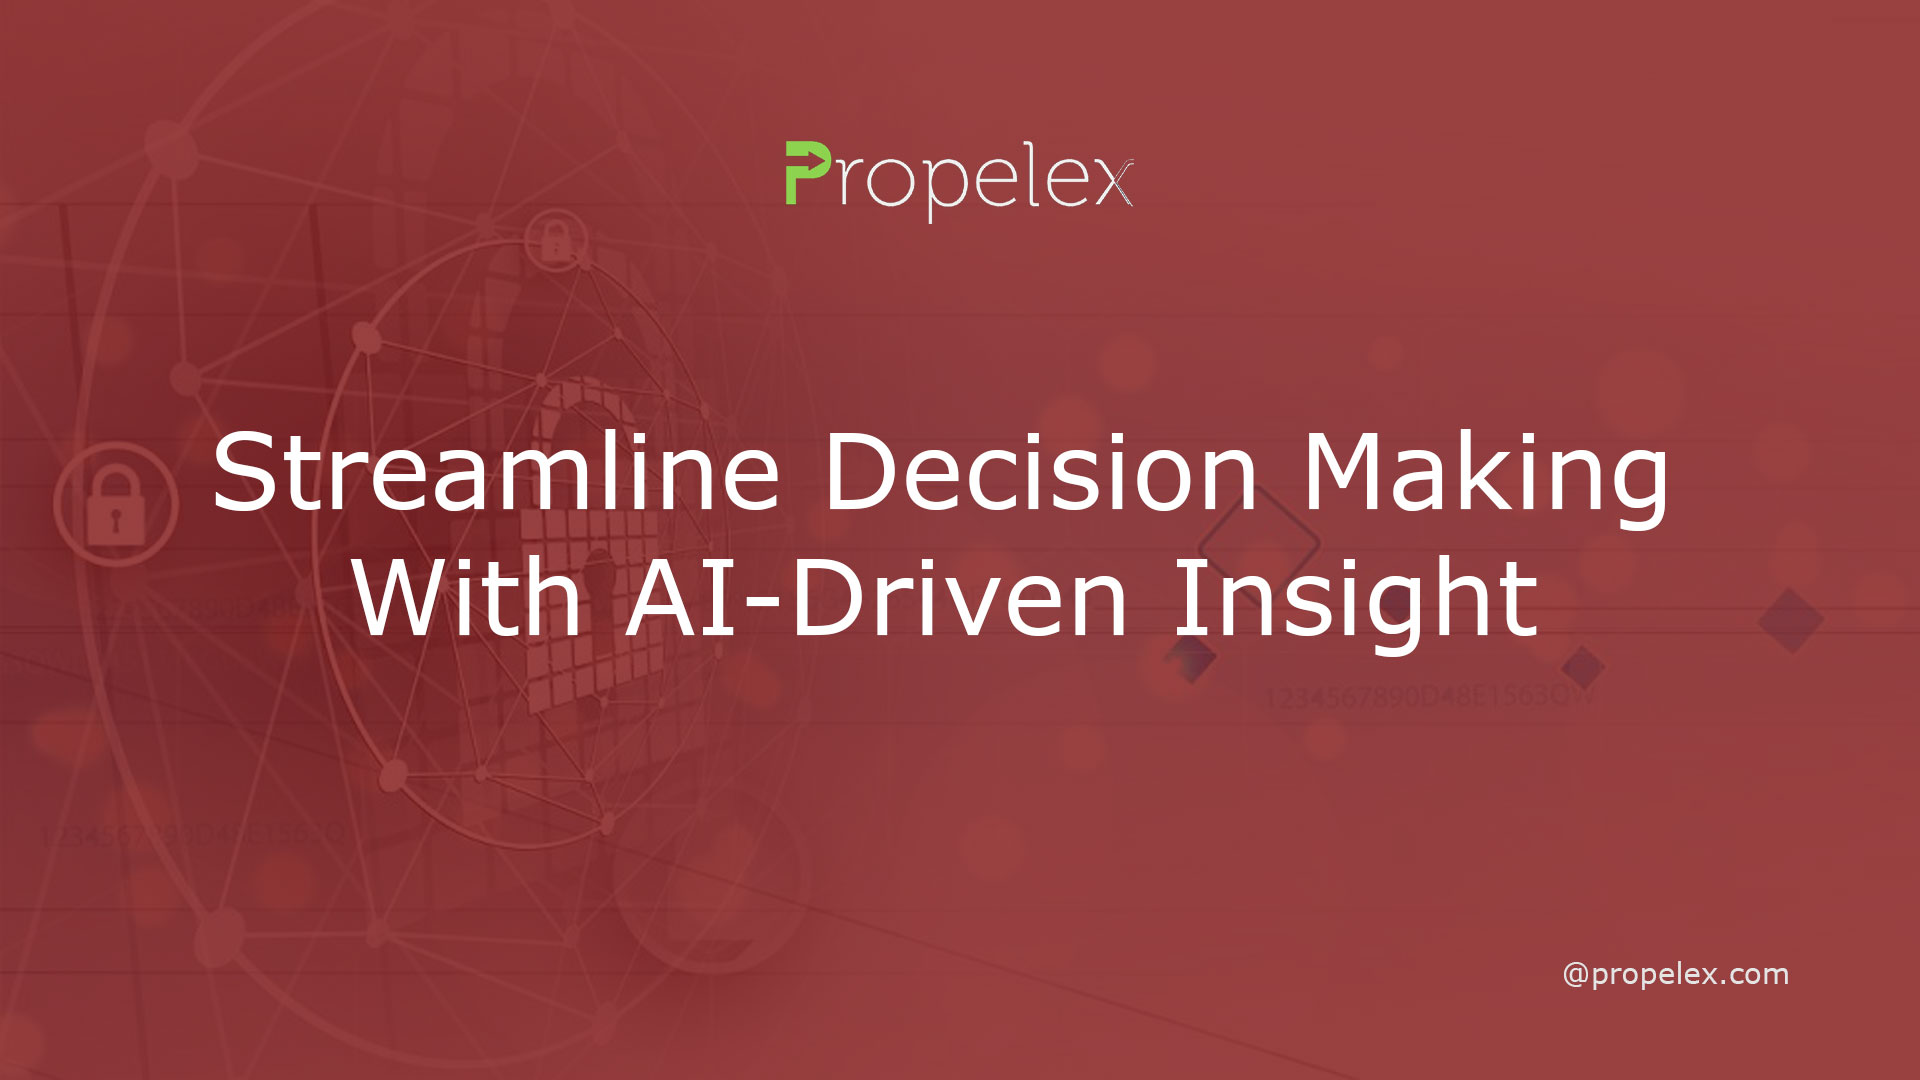 Streamline Decision Making With AI-Driven Insight